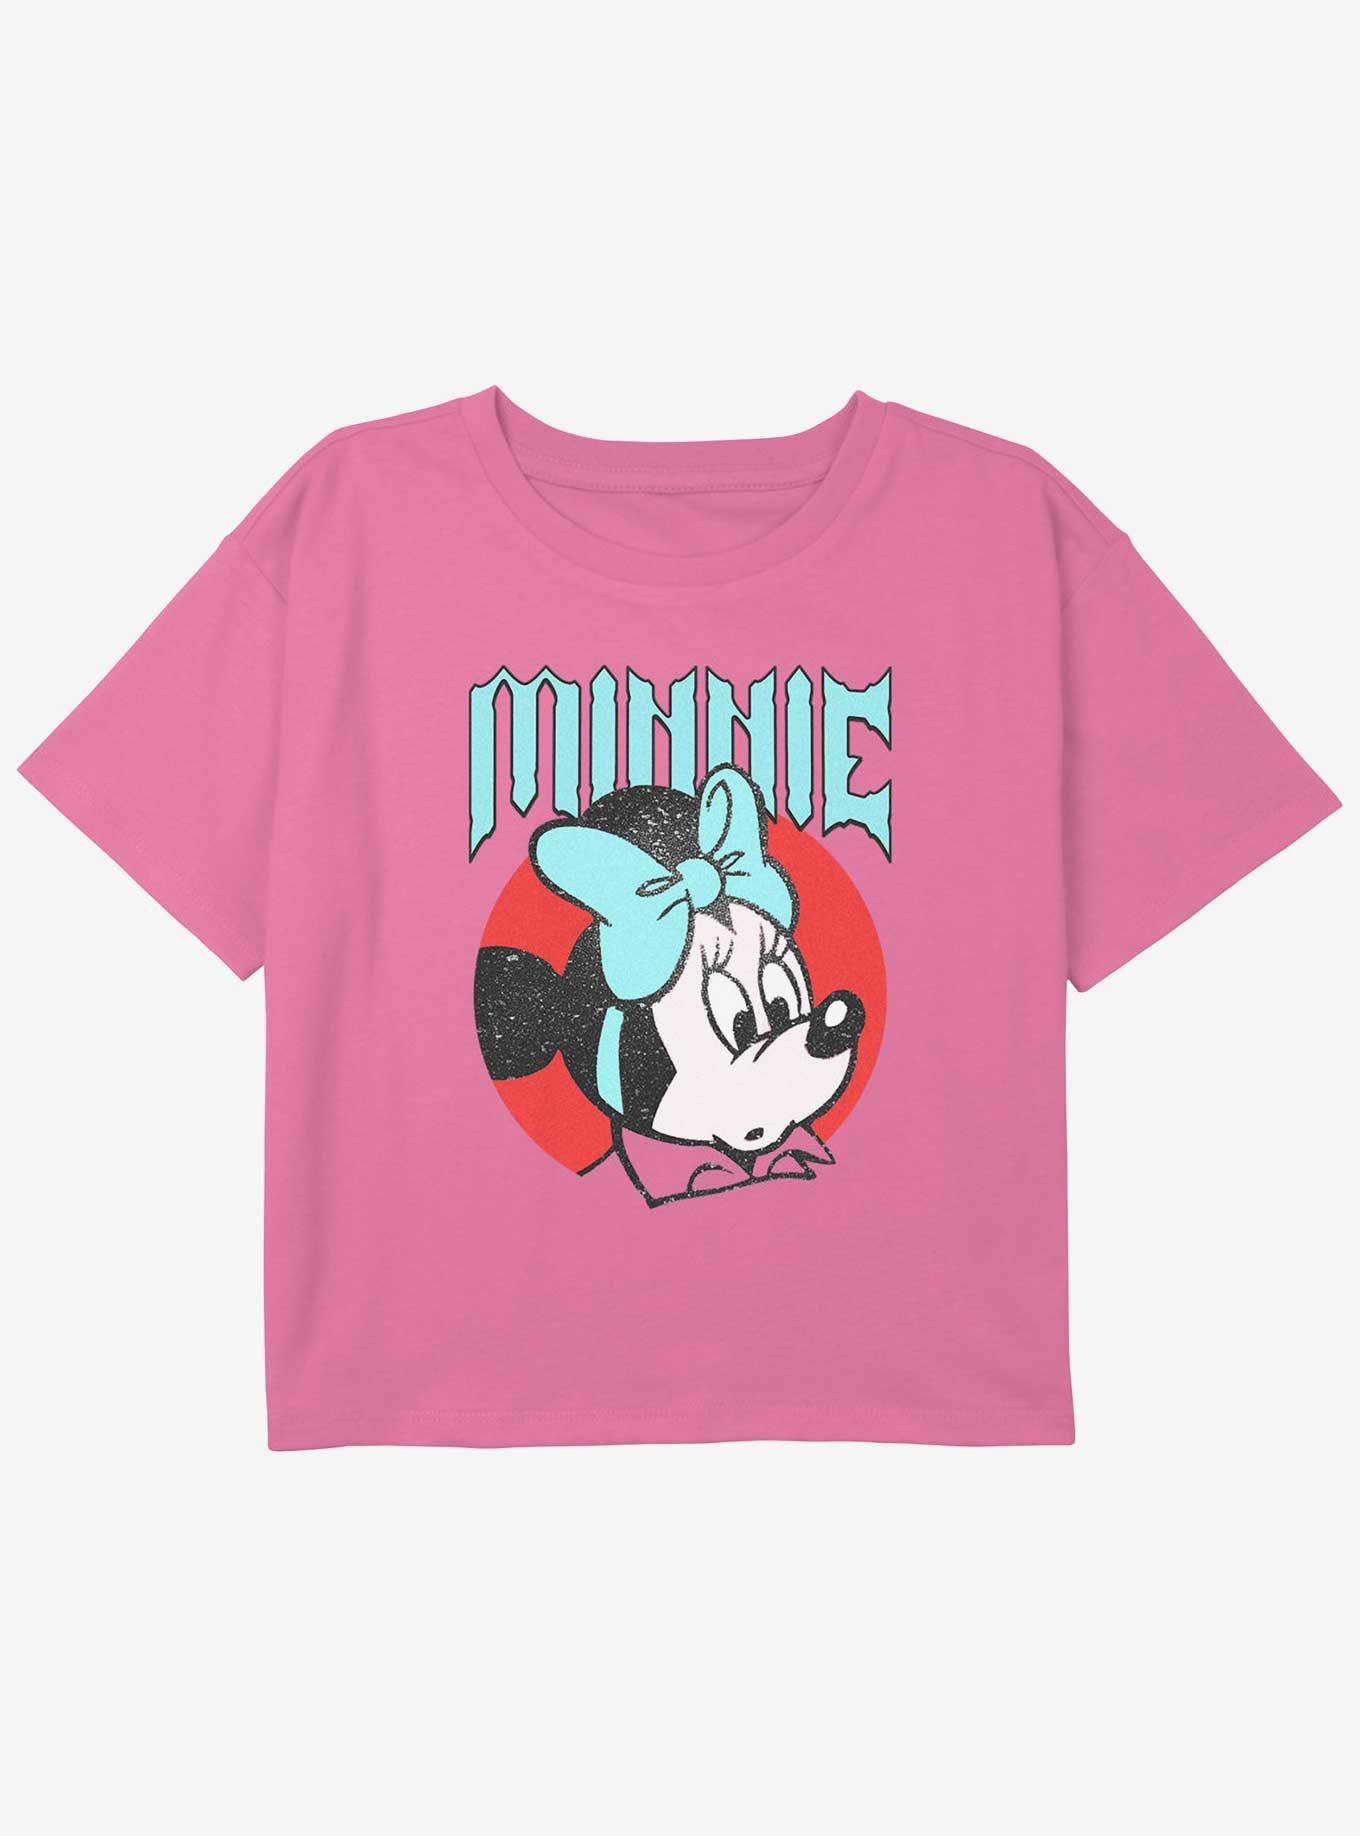 Disney Mickey Mouse Grunge Minnie Girls Youth Crop T-Shirt, PINK, hi-res